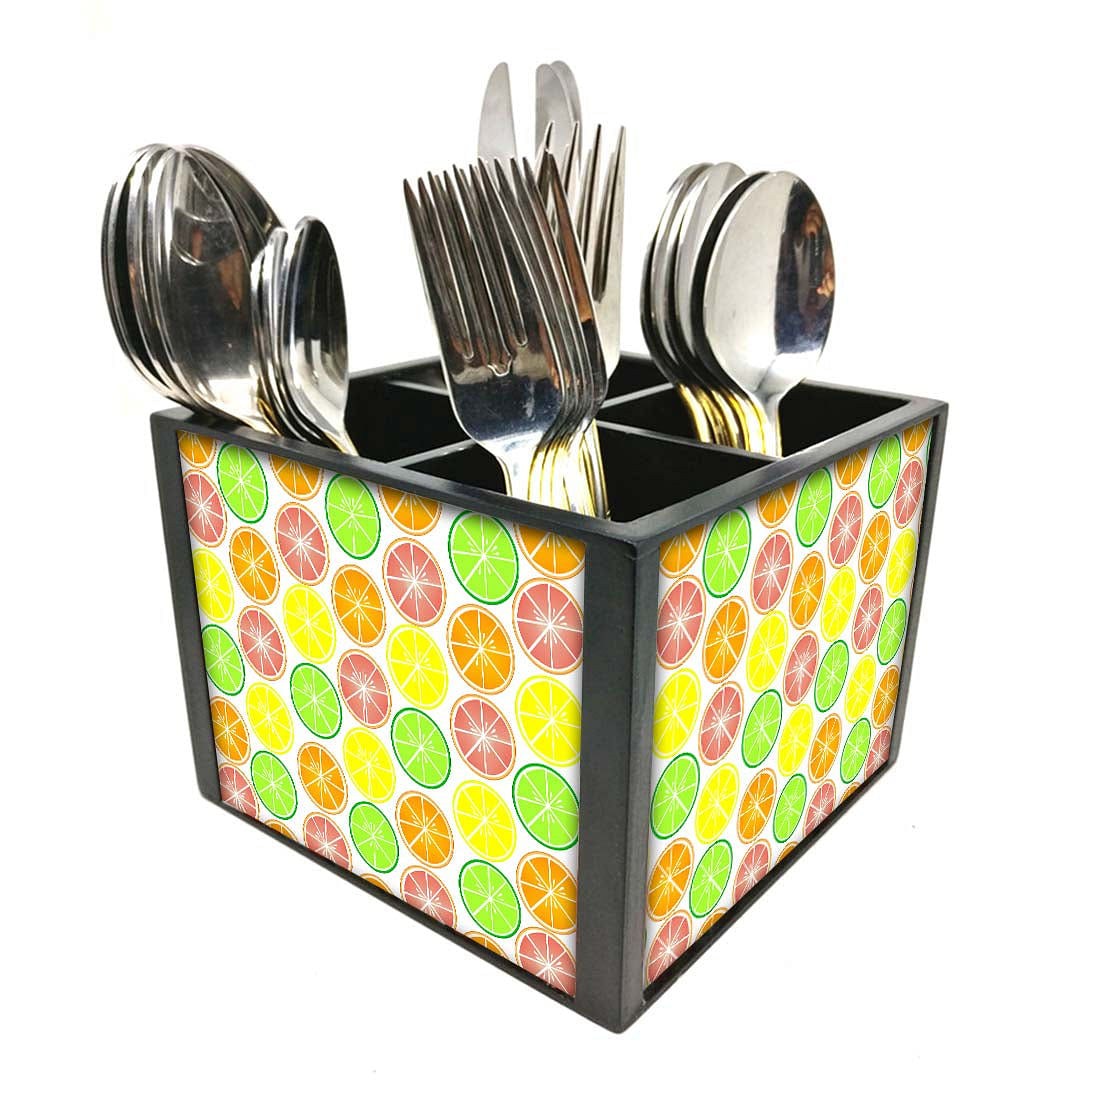 Lamons Cutlery Holder Stand Silverware Caddy Organizer for Spoons, Forks & Knives-Made of Pinewood Nutcase